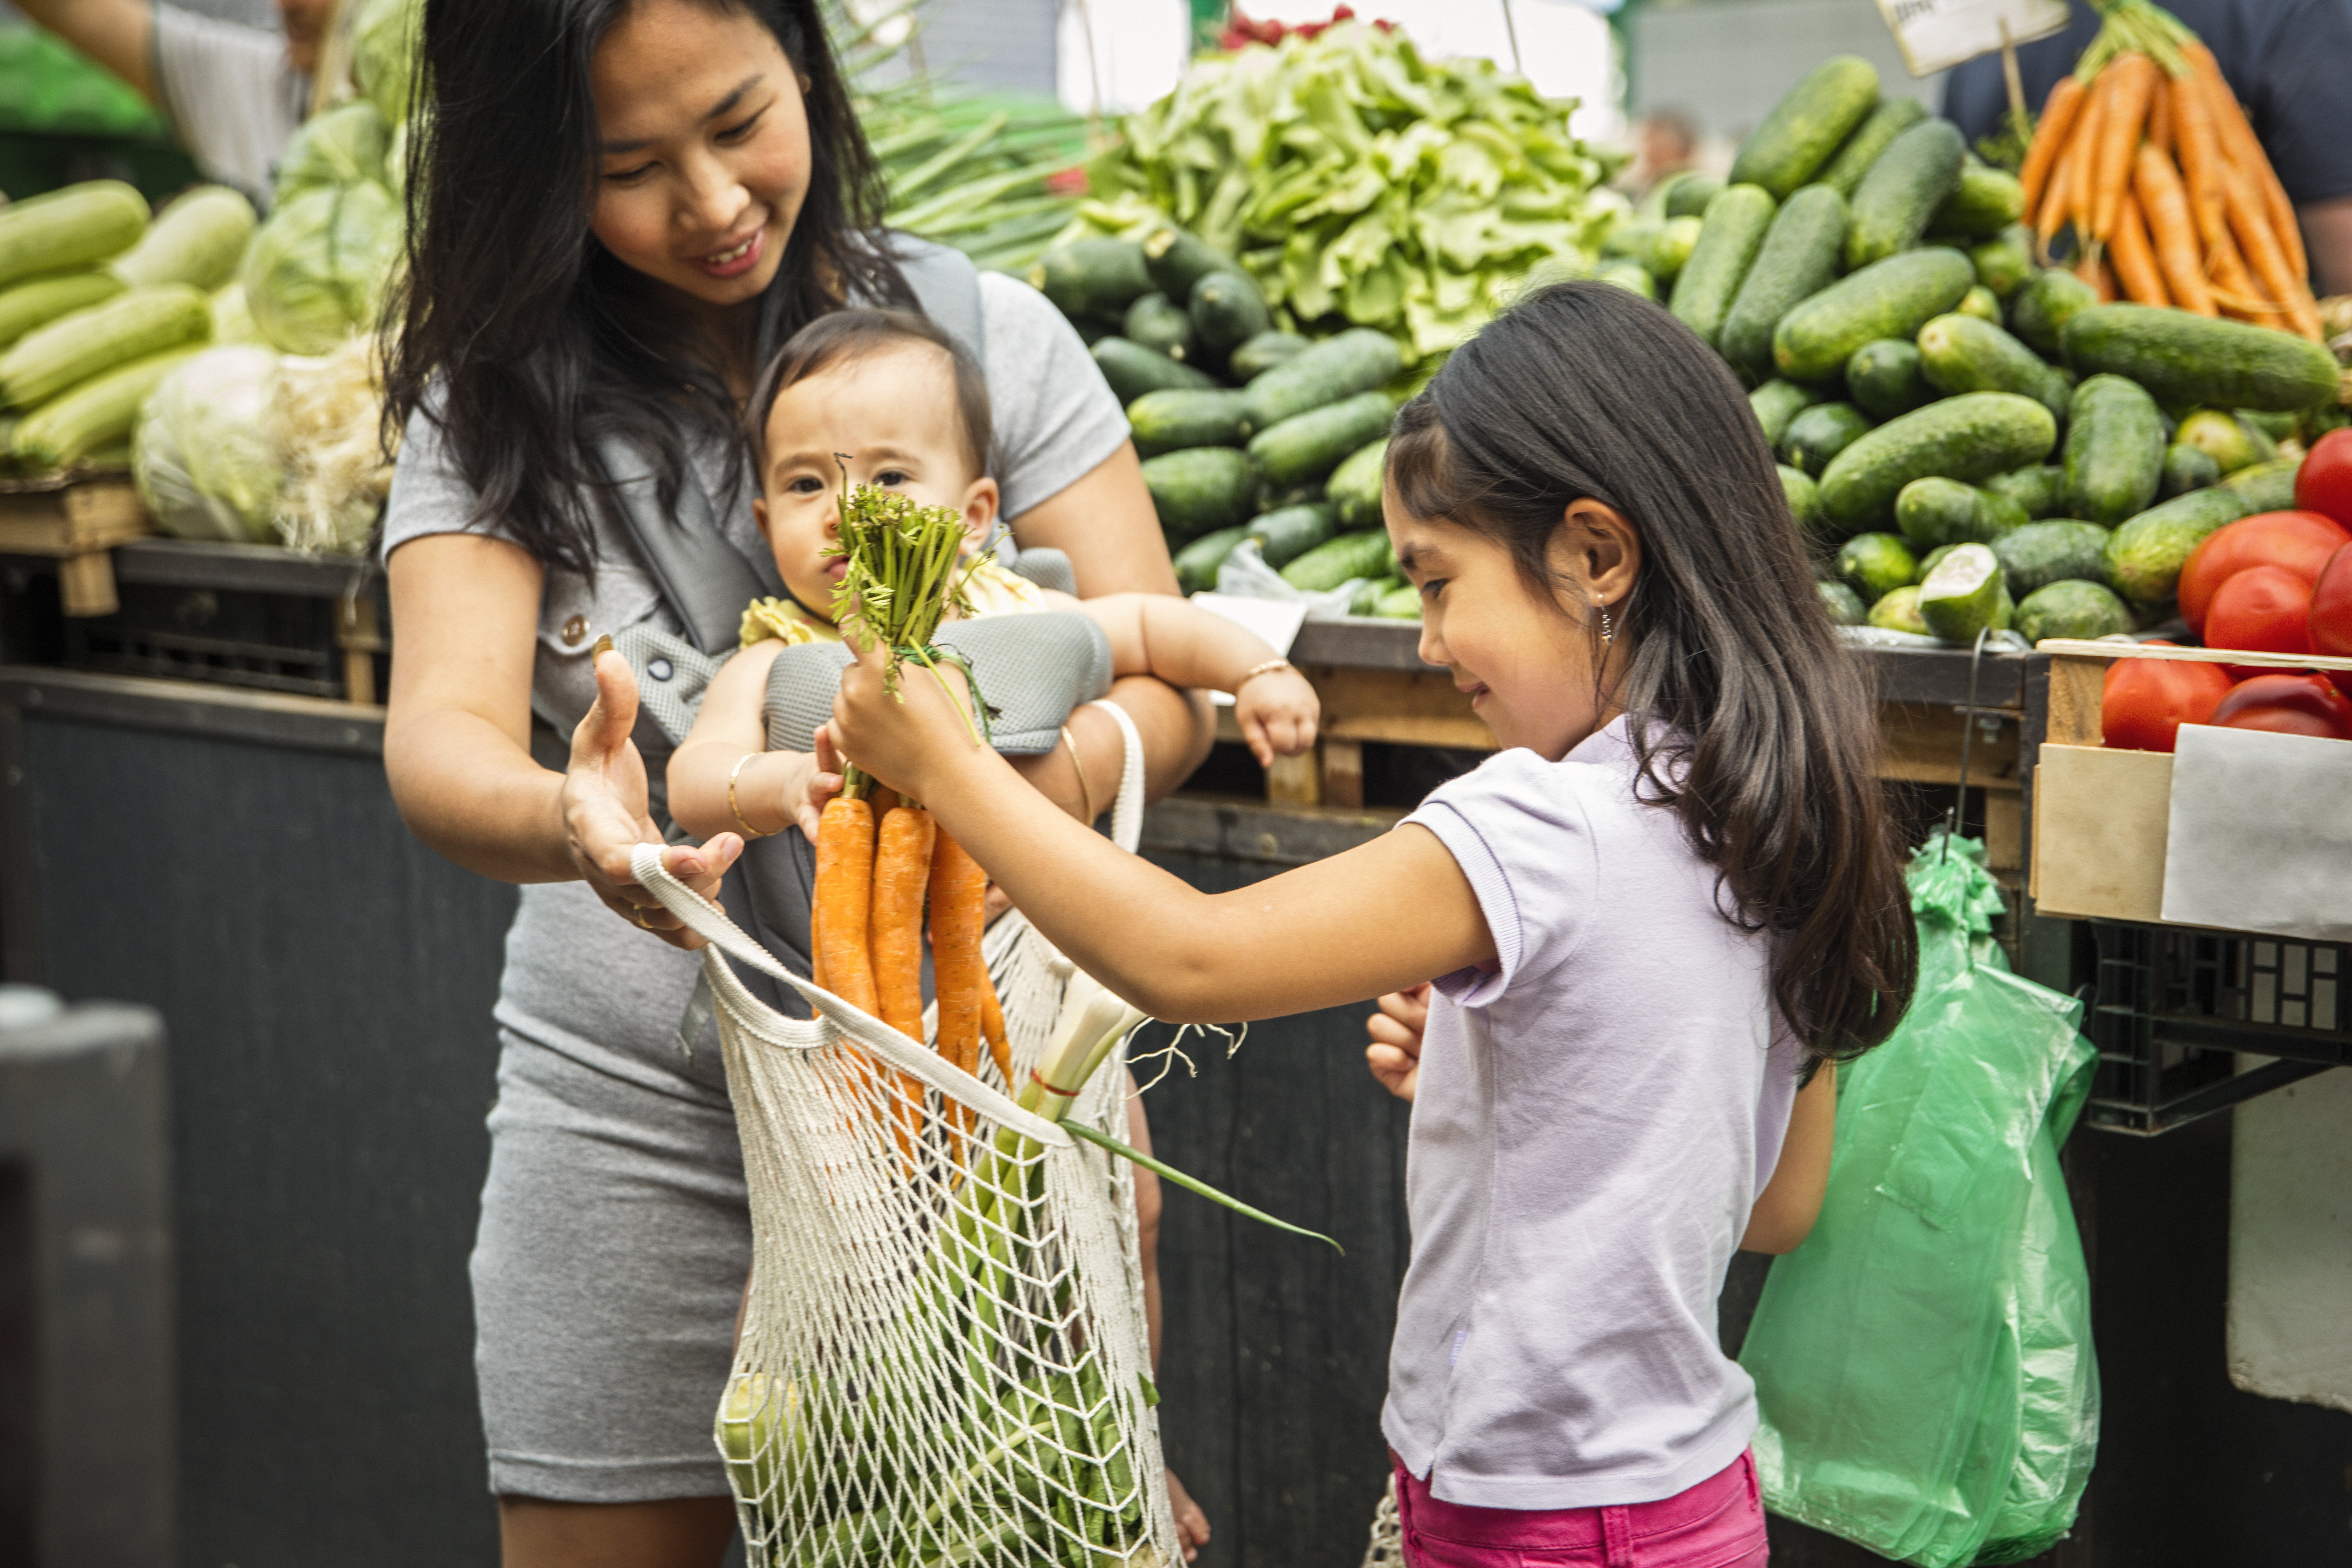 A mother and her two children placing vegetables in a mesh grocery bag